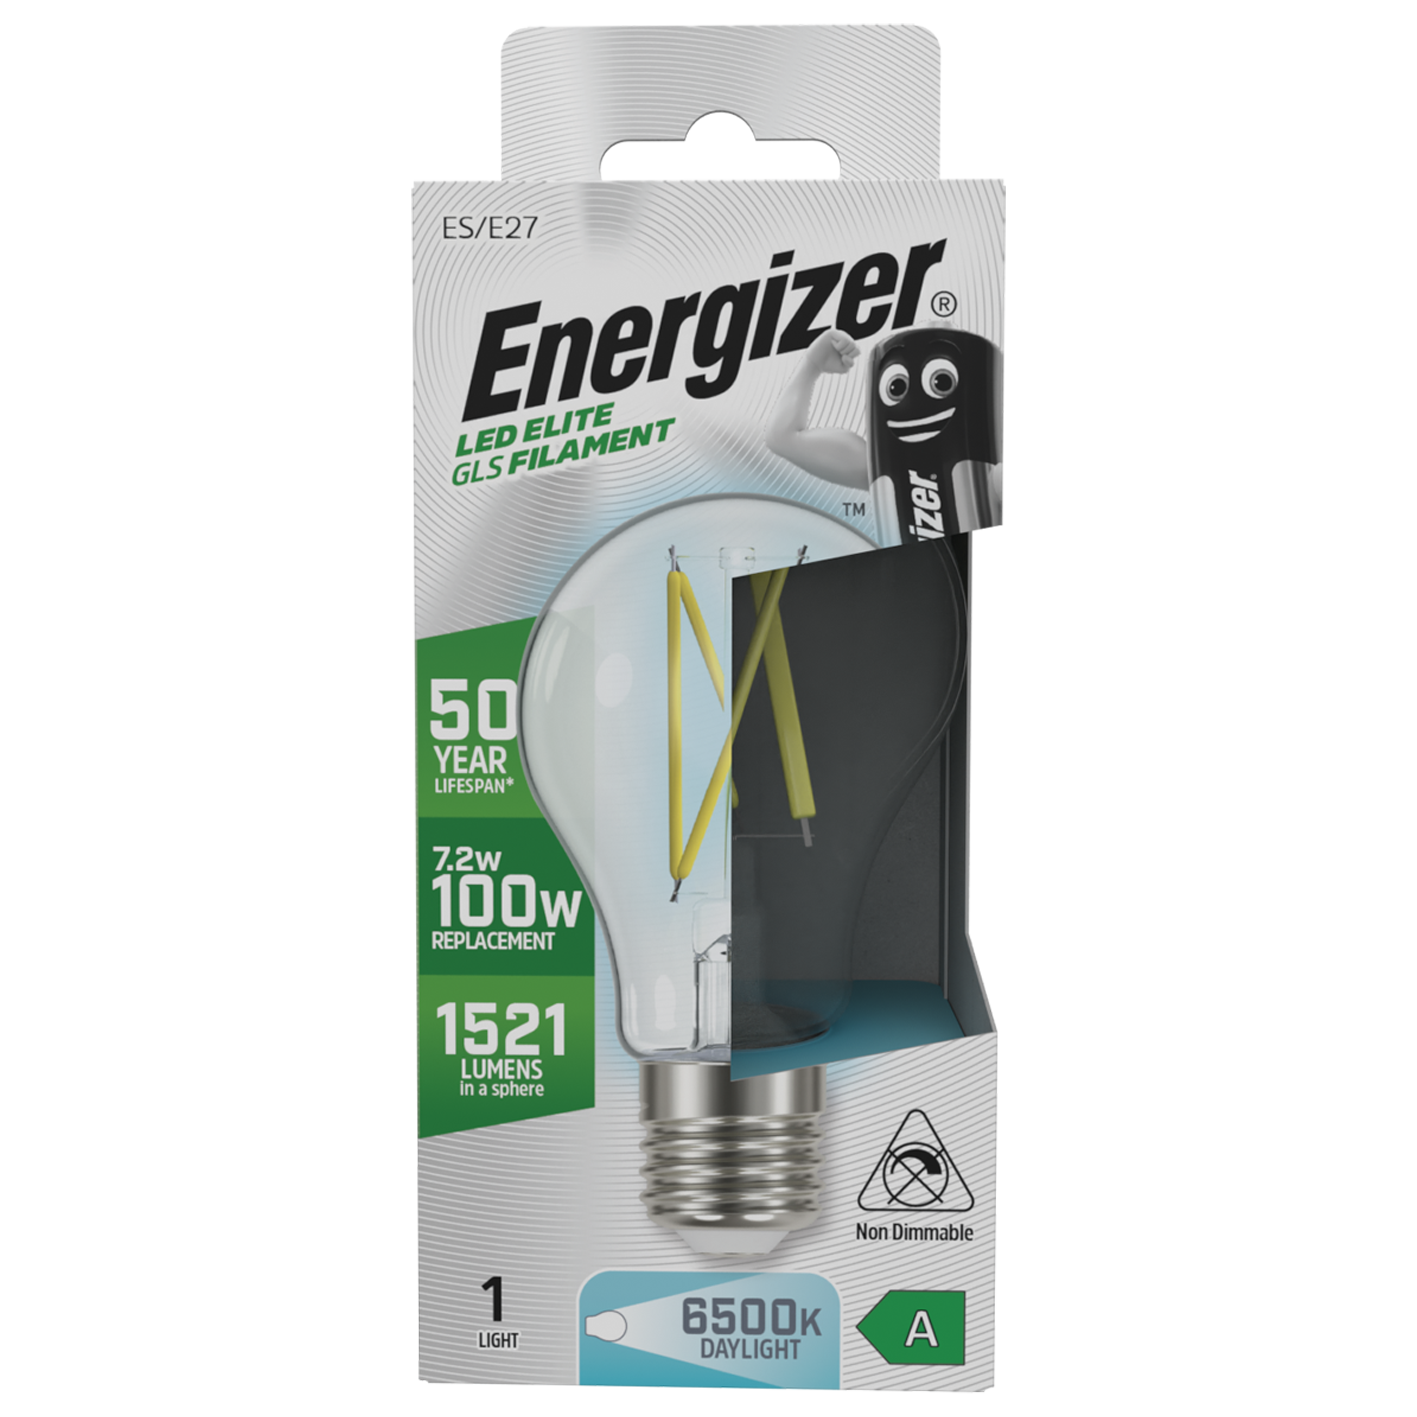 S29633 Energizer A Rated LED Elite GLS E27 Filament 1521lm 7.2W 6500K (Daylight) - Box of 1